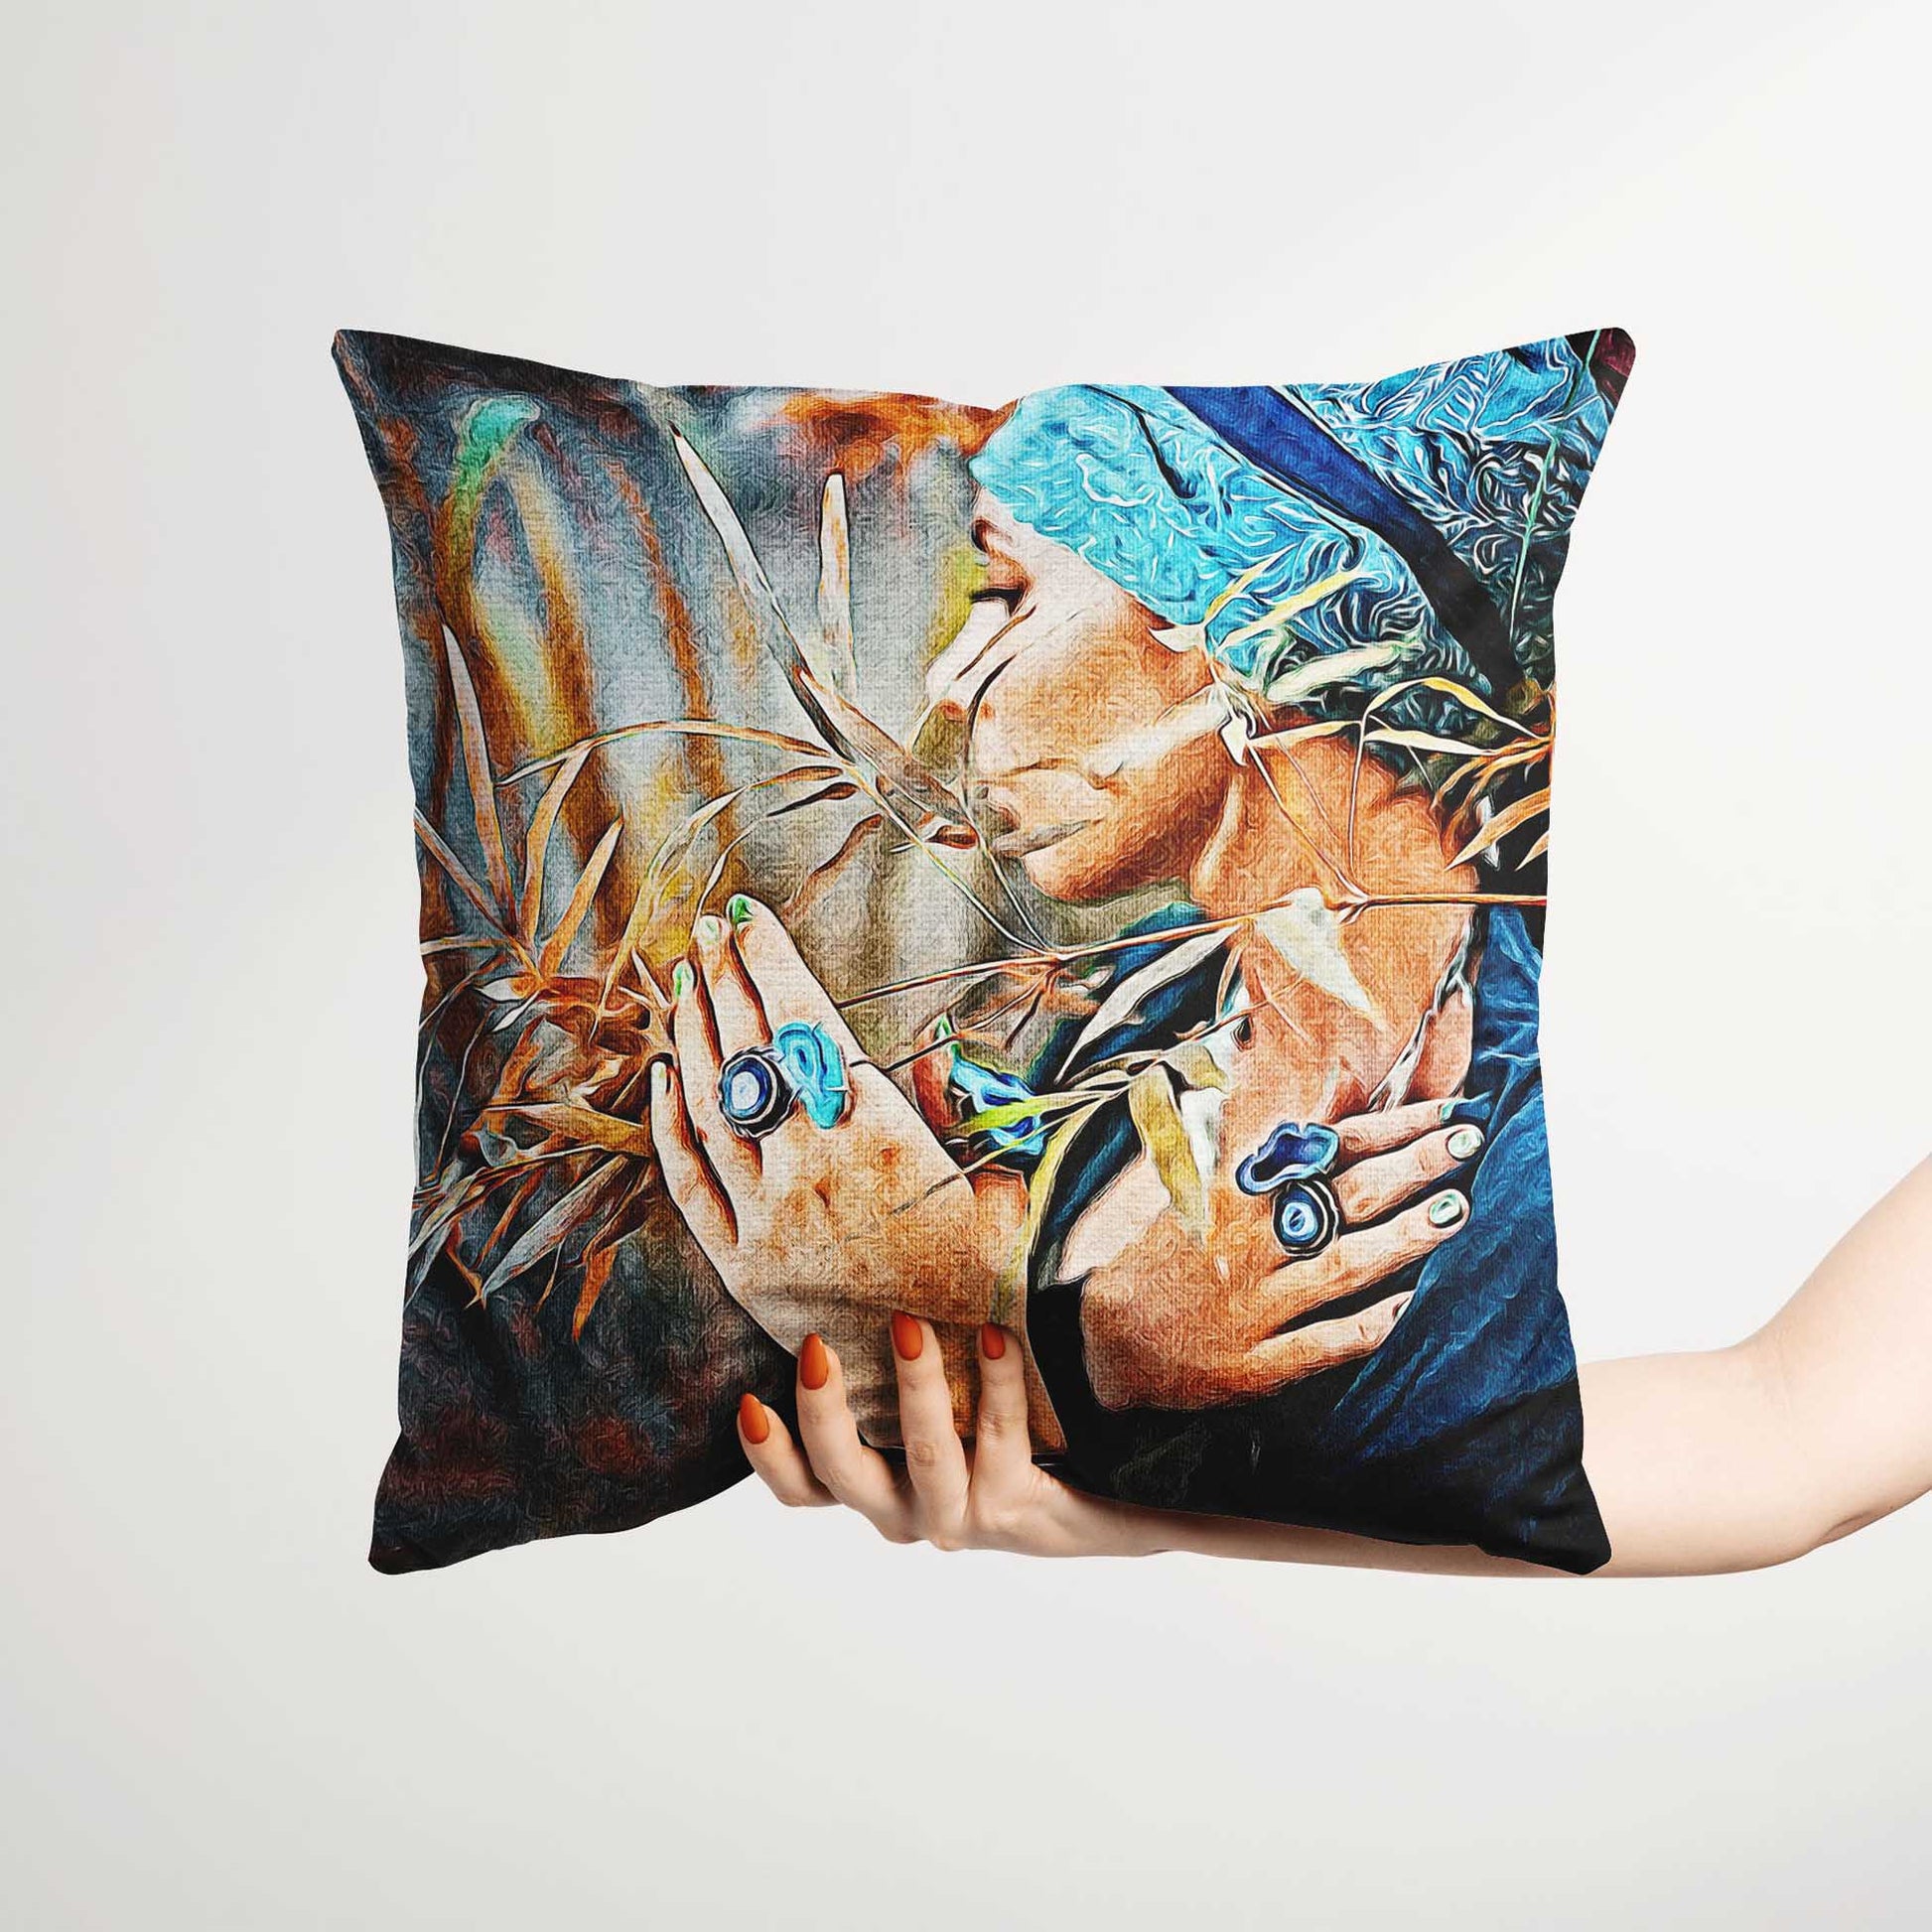 Unleash your imagination with the Personalised Original Oil Painting Cushion. Crafted with meticulous attention to detail, this luxurious handmade cushion showcases a painting derived from your photo, elegant and chic design